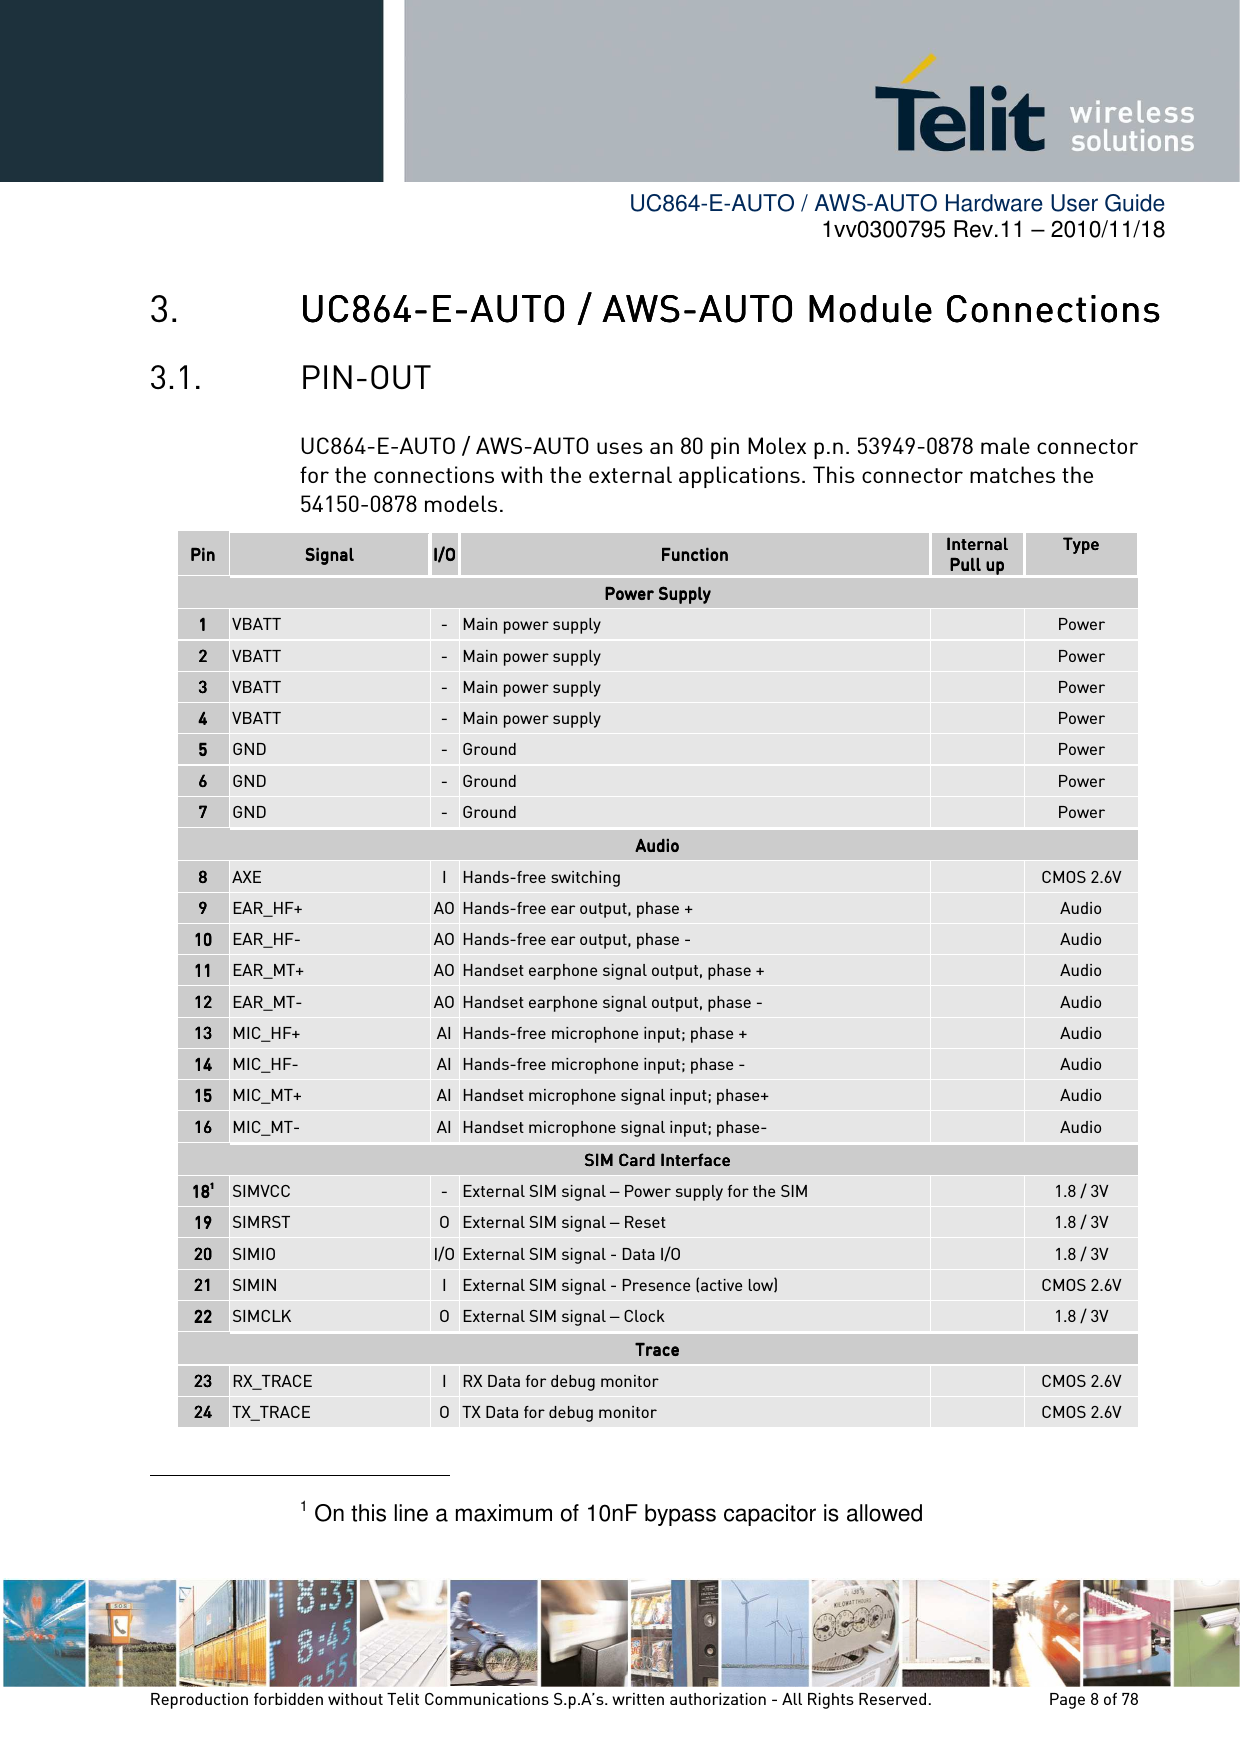        UC864-E-AUTO / AWS-AUTO Hardware User Guide 1vv0300795 Rev.11 – 2010/11/18     Reproduction forbidden without Telit Communications S.p.A’s. written authorization - All Rights Reserved.    Page 8 of 78  3. UC864UC864UC864UC864----EEEE----AUTOAUTOAUTOAUTO    / AWS/ AWS/ AWS/ AWS----AUTO AUTO AUTO AUTO MMMModule odule odule odule CCCConnections onnections onnections onnections     3.1. PIN-OUT UC864-E-AUTO / AWS-AUTO uses an 80 pin Molex p.n. 53949-0878 male connector for the connections with the external applications. This connector matches the 54150-0878 models. PinPinPinPin     SignalSignalSignalSignal     I/OI/OI/OI/O    FunctionFunctionFunctionFunction    InternalInternalInternalInternal    Pull upPull upPull upPull up    TypeTypeTypeType        Power SupplyPower SupplyPower SupplyPower Supply    1111     VBATT  - Main power supply    Power 2222     VBATT  - Main power supply    Power 3333     VBATT  - Main power supply    Power 4444     VBATT  - Main power supply    Power 5555     GND  - Ground    Power 6666     GND  - Ground    Power 7777     GND  - Ground    Power AudioAudioAudioAudio    8888     AXE  I  Hands-free switching    CMOS 2.6V 9999     EAR_HF+  AO Hands-free ear output, phase +    Audio 10101010     EAR_HF-  AO Hands-free ear output, phase -    Audio 11111111     EAR_MT+  AO Handset earphone signal output, phase +    Audio 12121212     EAR_MT-  AO Handset earphone signal output, phase -    Audio 13131313     MIC_HF+  AI Hands-free microphone input; phase +     Audio 14141414     MIC_HF-  AI Hands-free microphone input; phase -     Audio 15151515     MIC_MT+  AI Handset microphone signal input; phase+     Audio 16161616     MIC_MT-  AI Handset microphone signal input; phase-    Audio SIM Card InterfaceSIM Card InterfaceSIM Card InterfaceSIM Card Interface    181818181111     SIMVCC  - External SIM signal – Power supply for the SIM    1.8 / 3V 19191919     SIMRST  O External SIM signal – Reset    1.8 / 3V 20202020     SIMIO  I/O External SIM signal - Data I/O    1.8 / 3V 21212121     SIMIN  I  External SIM signal - Presence (active low)    CMOS 2.6V 22222222     SIMCLK  O External SIM signal – Clock    1.8 / 3V TraceTraceTraceTrace    23232323     RX_TRACE  I  RX Data for debug monitor    CMOS 2.6V 24242424     TX_TRACE  O TX Data for debug monitor    CMOS 2.6V                                                       1 On this line a maximum of 10nF bypass capacitor is allowed 